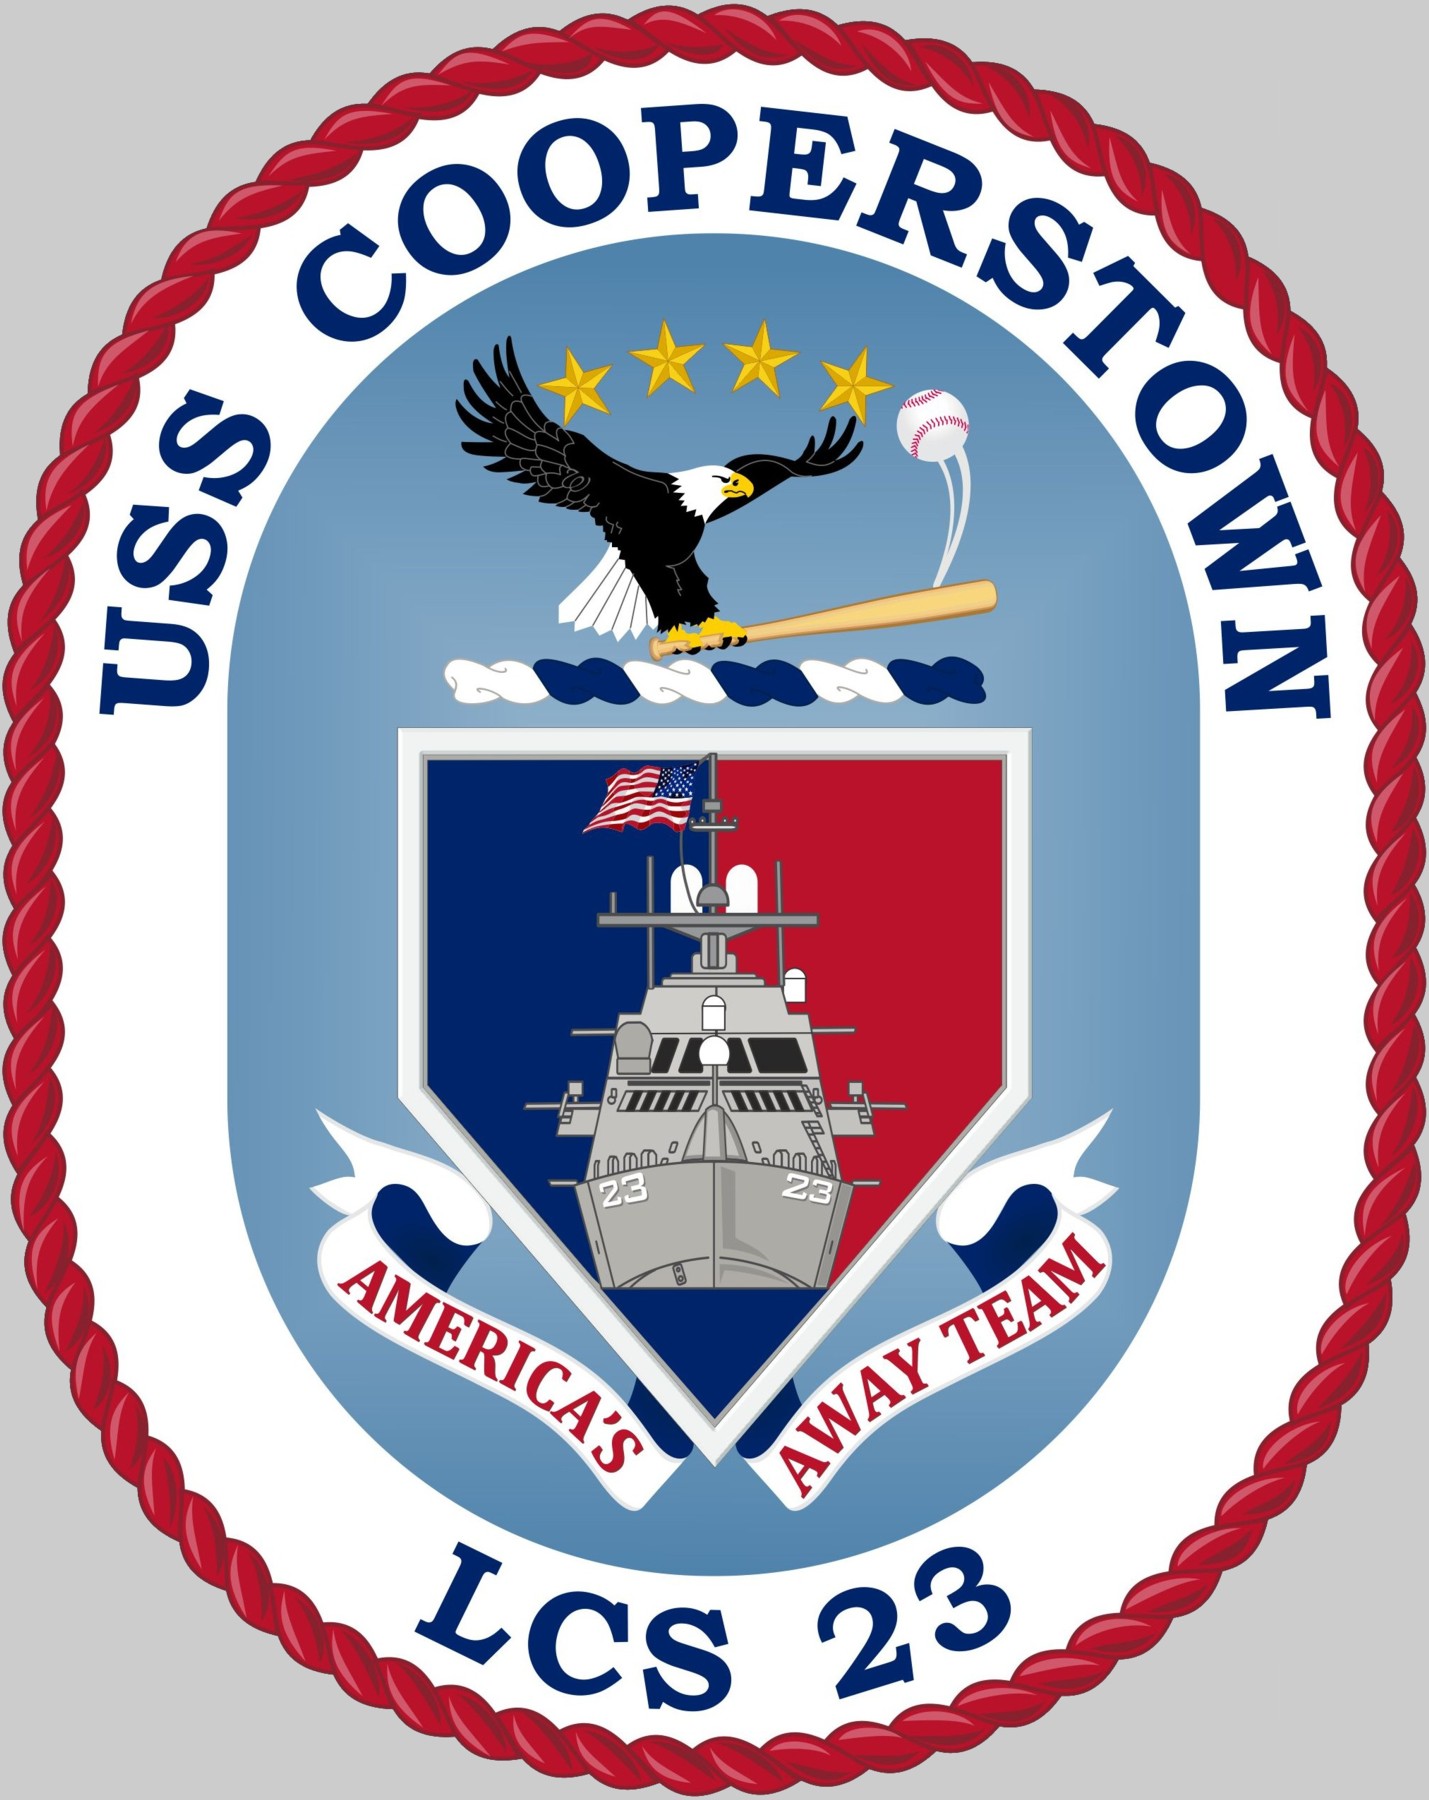 lcs-23 uss cooperstown crest insignia patch badge freedom class littoral combat ship us navy 02x